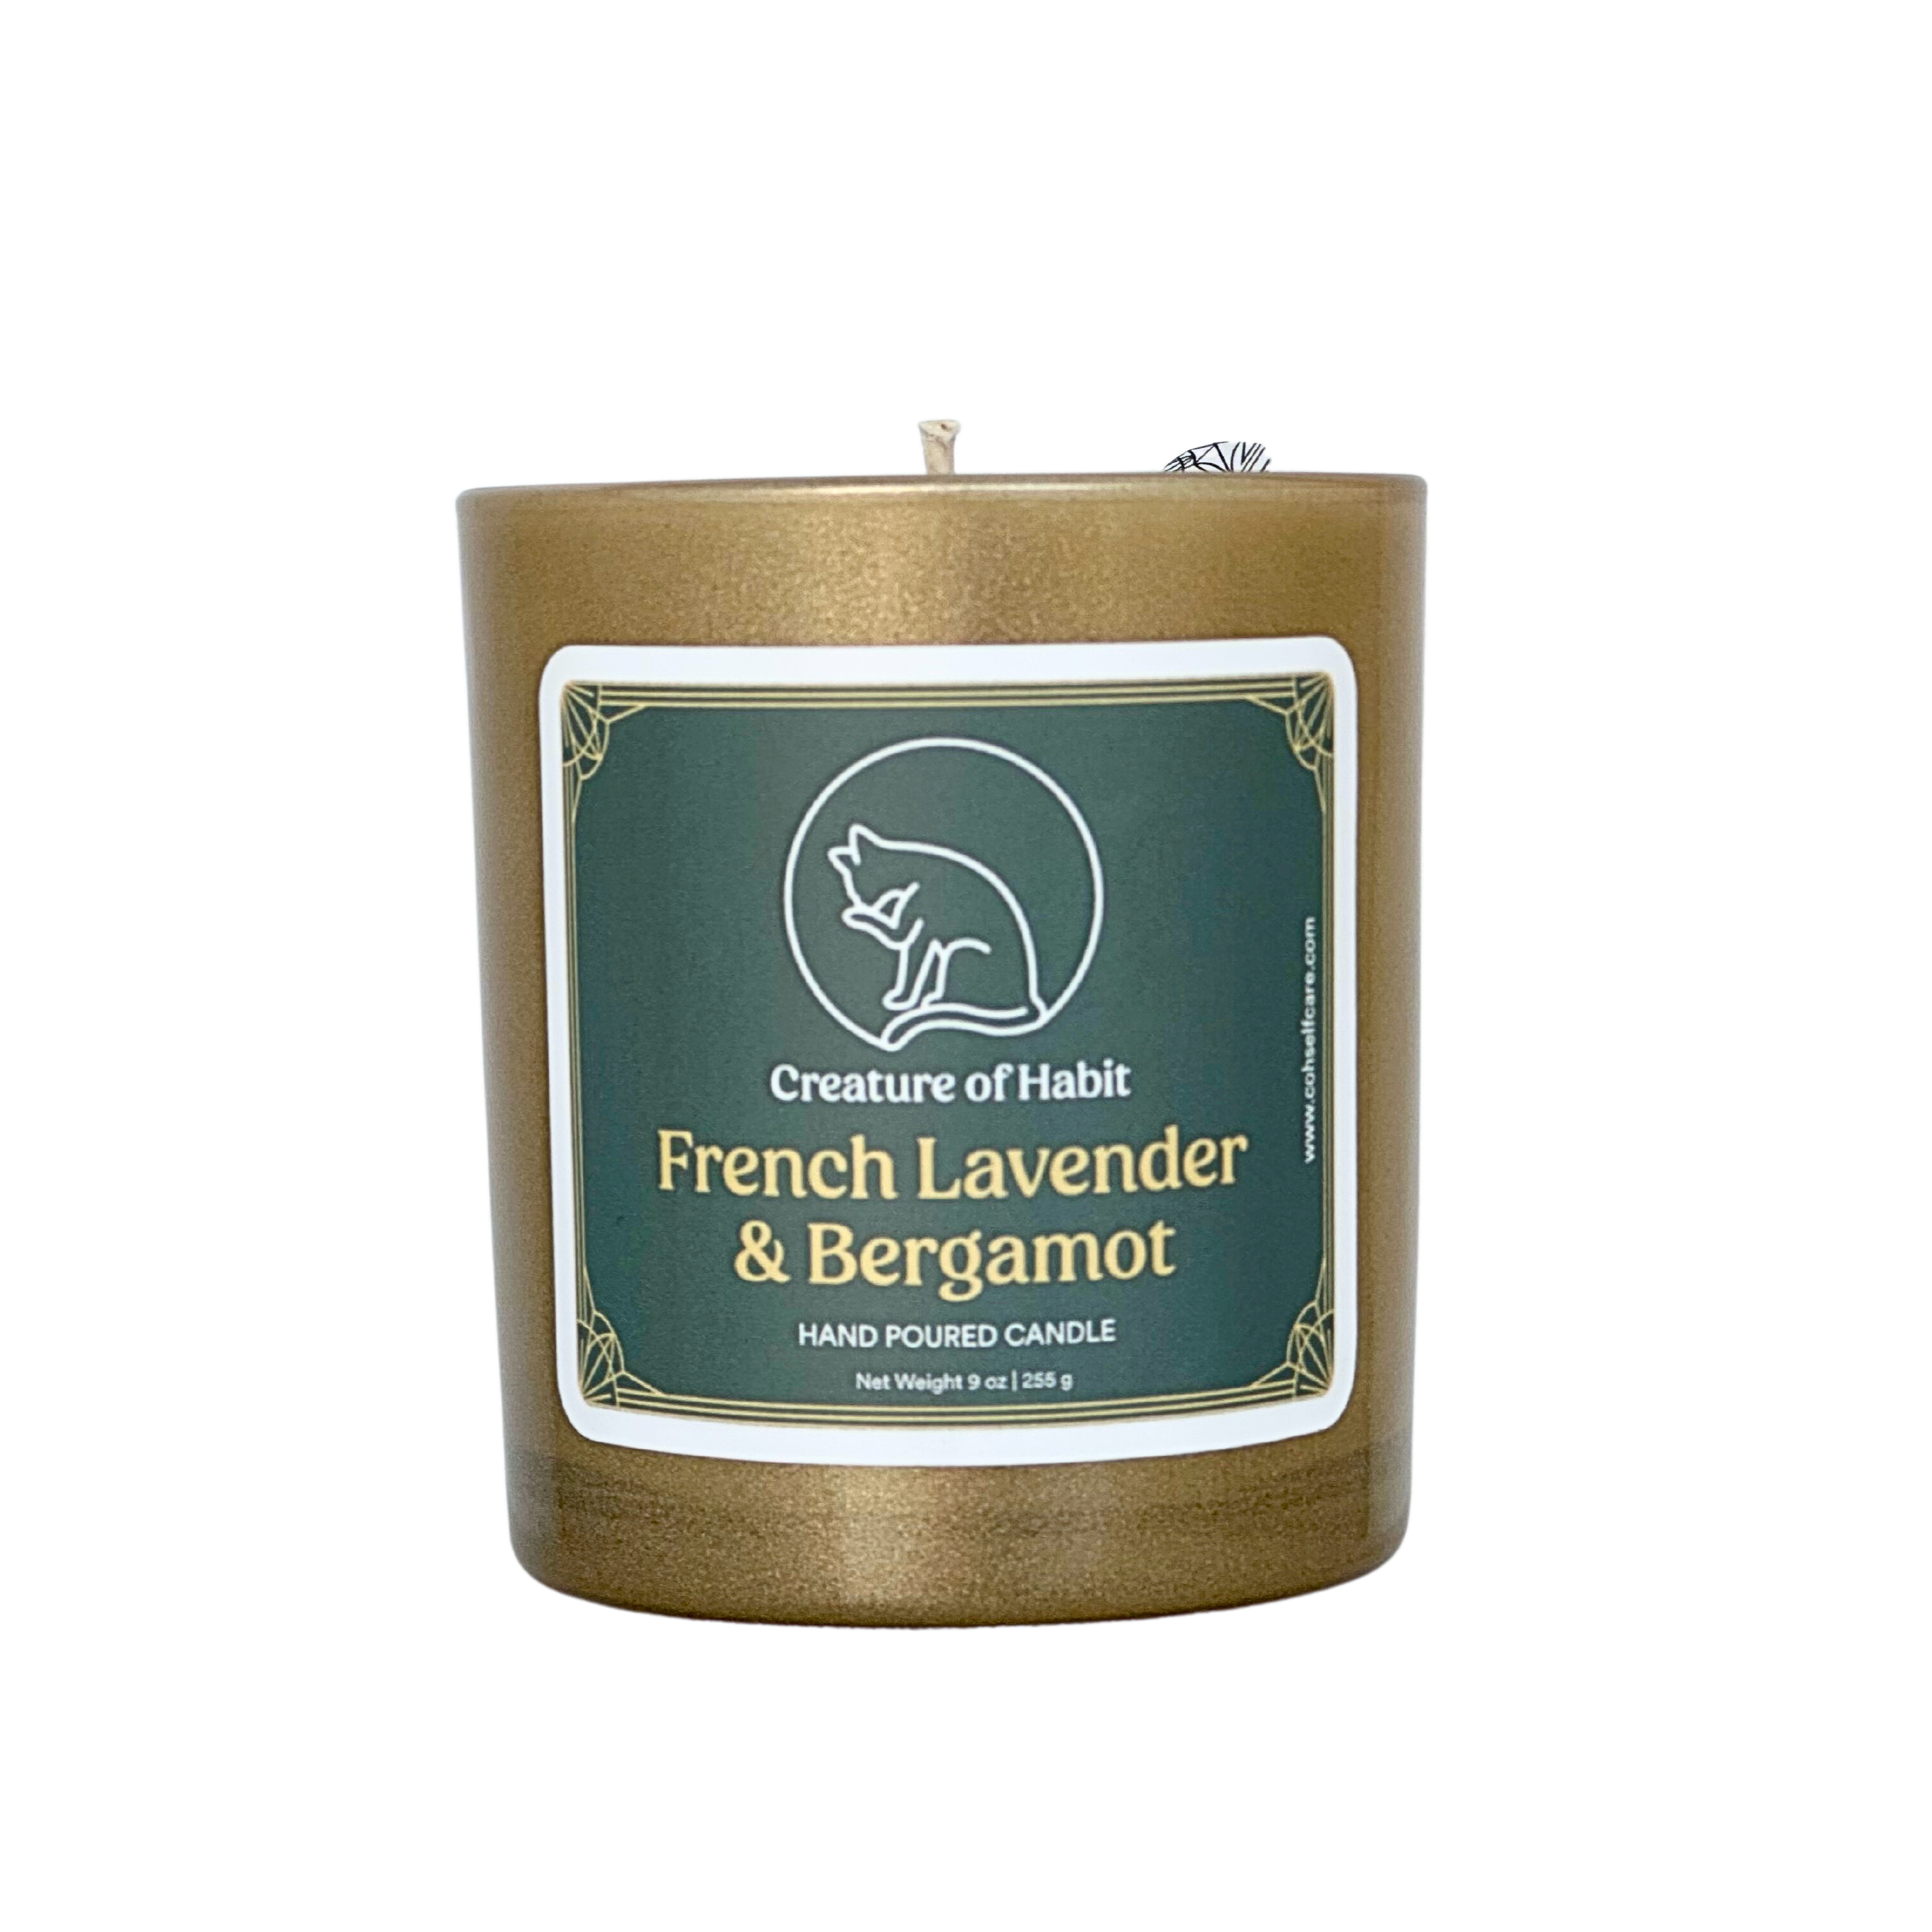 An unlit soy candle within a golden vessel is against a white background. The label is a greyish cyan featuring the logo of a white cat silhouette, the name of the company Creature of Habit, and the scent name French Lavender &amp; Bergamot.